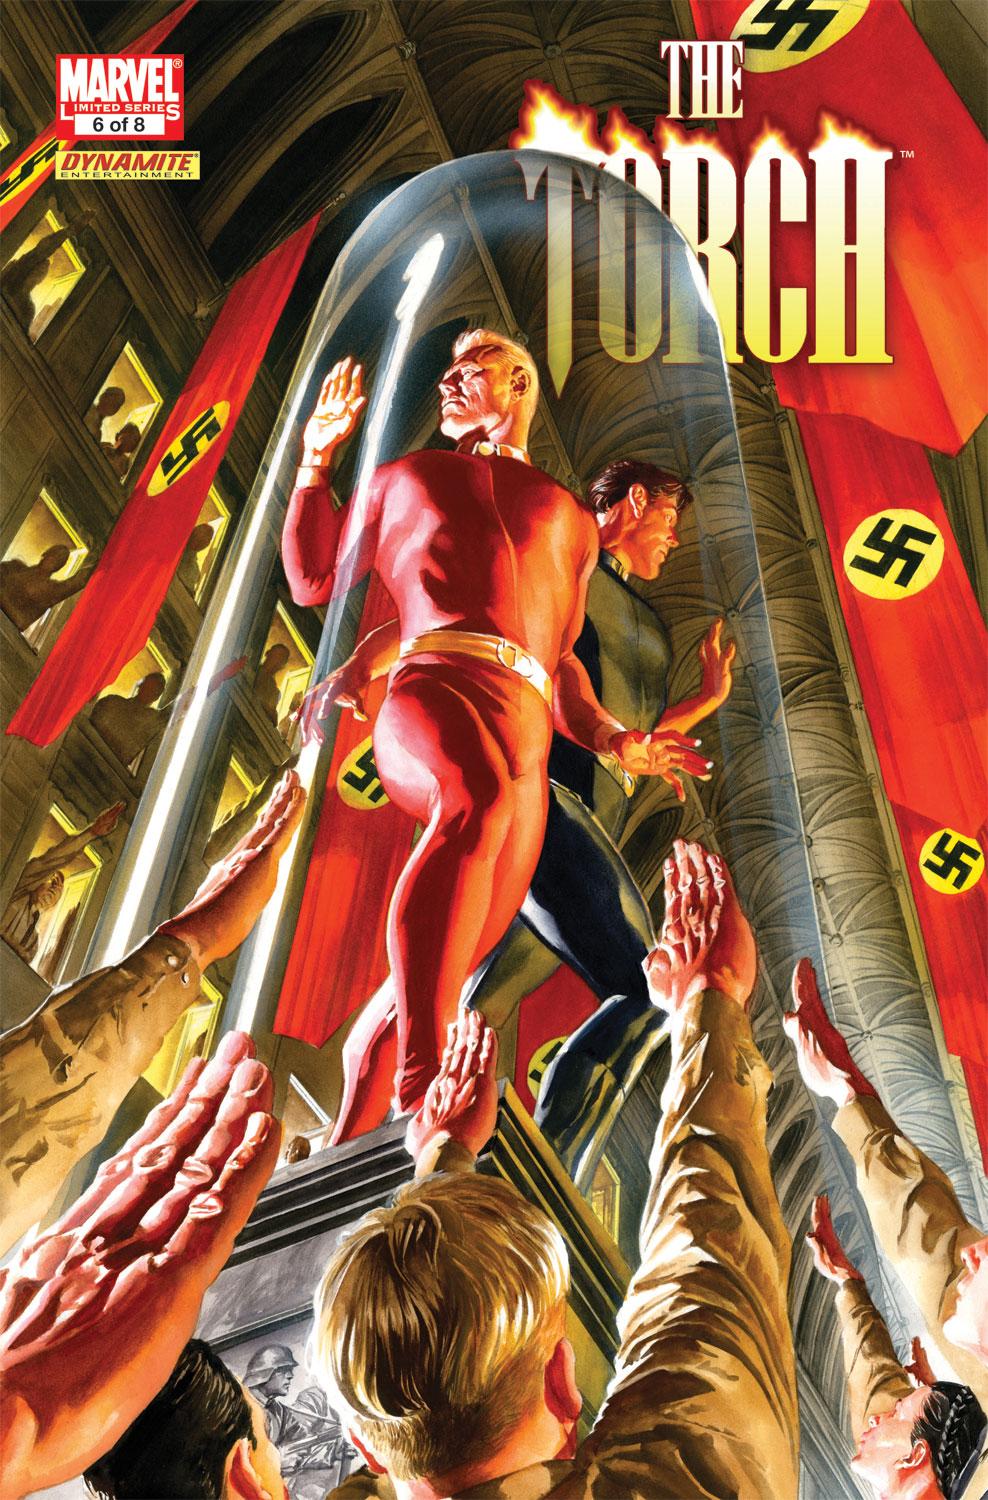 The Torch (2009) #6